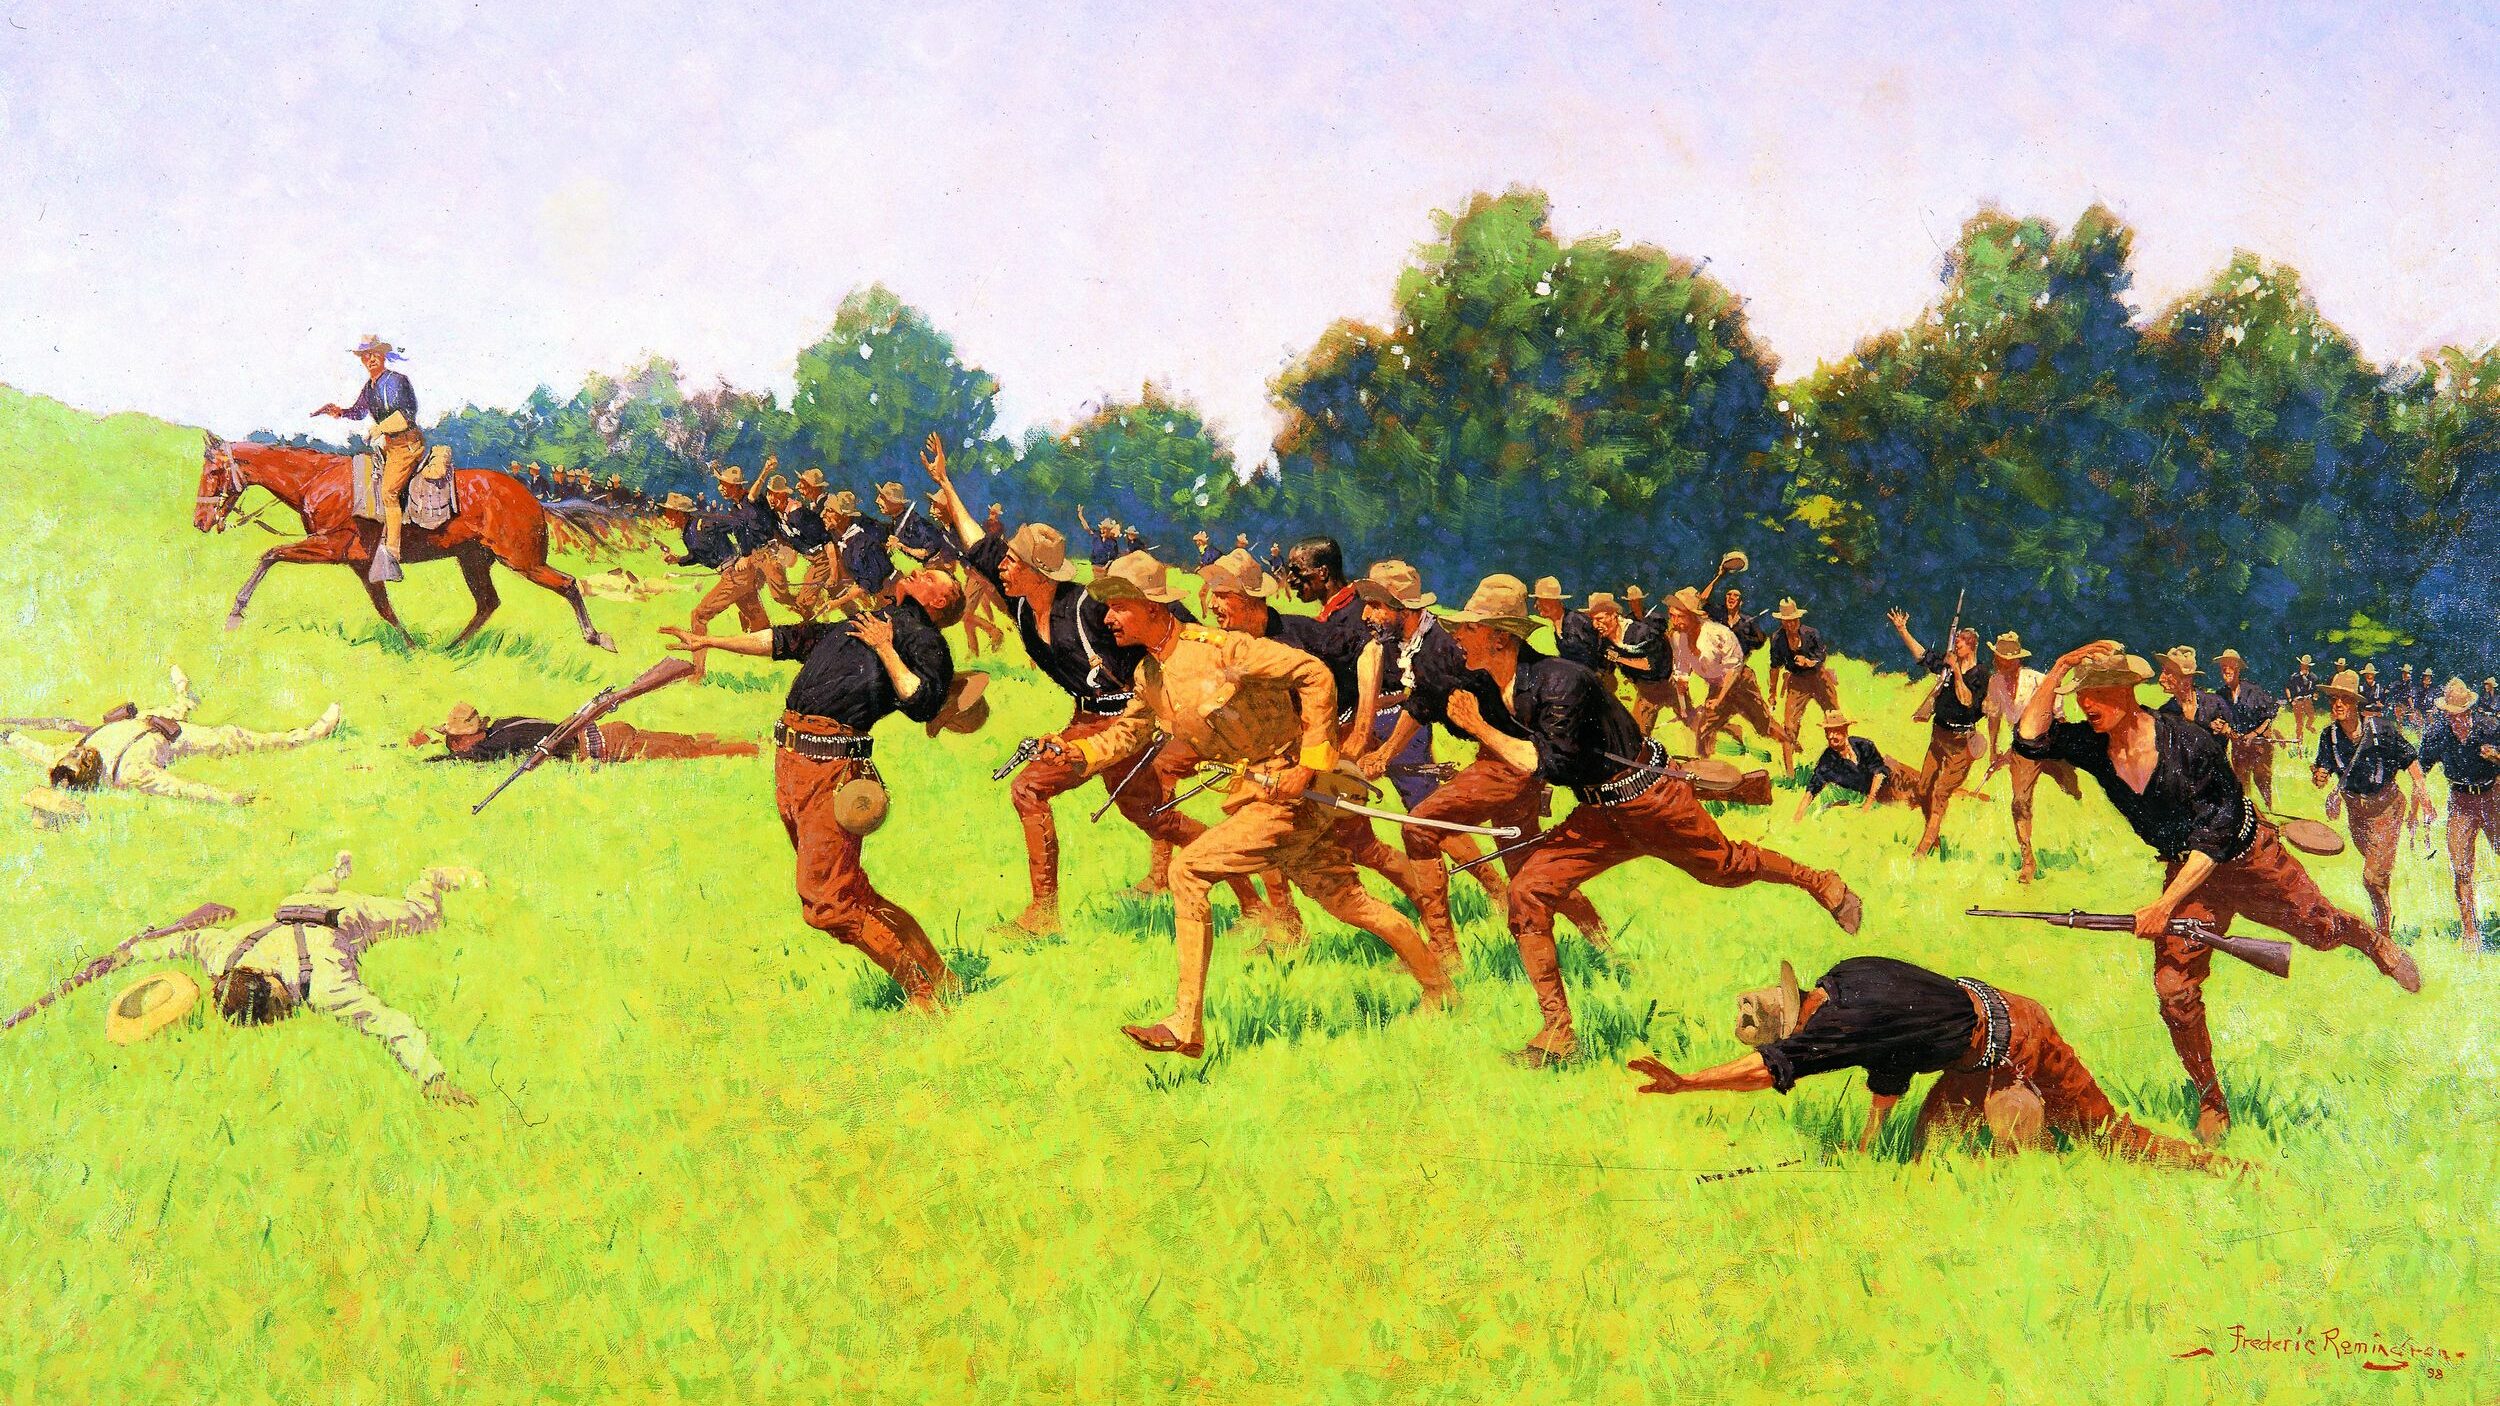 Western artist Frederick Remington’s romantic painting, Charge of the Rough Riders at San Juan Hill, did much to make Theodore Roosevelt famous. Courtesy Frederick Remington Art Museum, Ogdensburg, NY